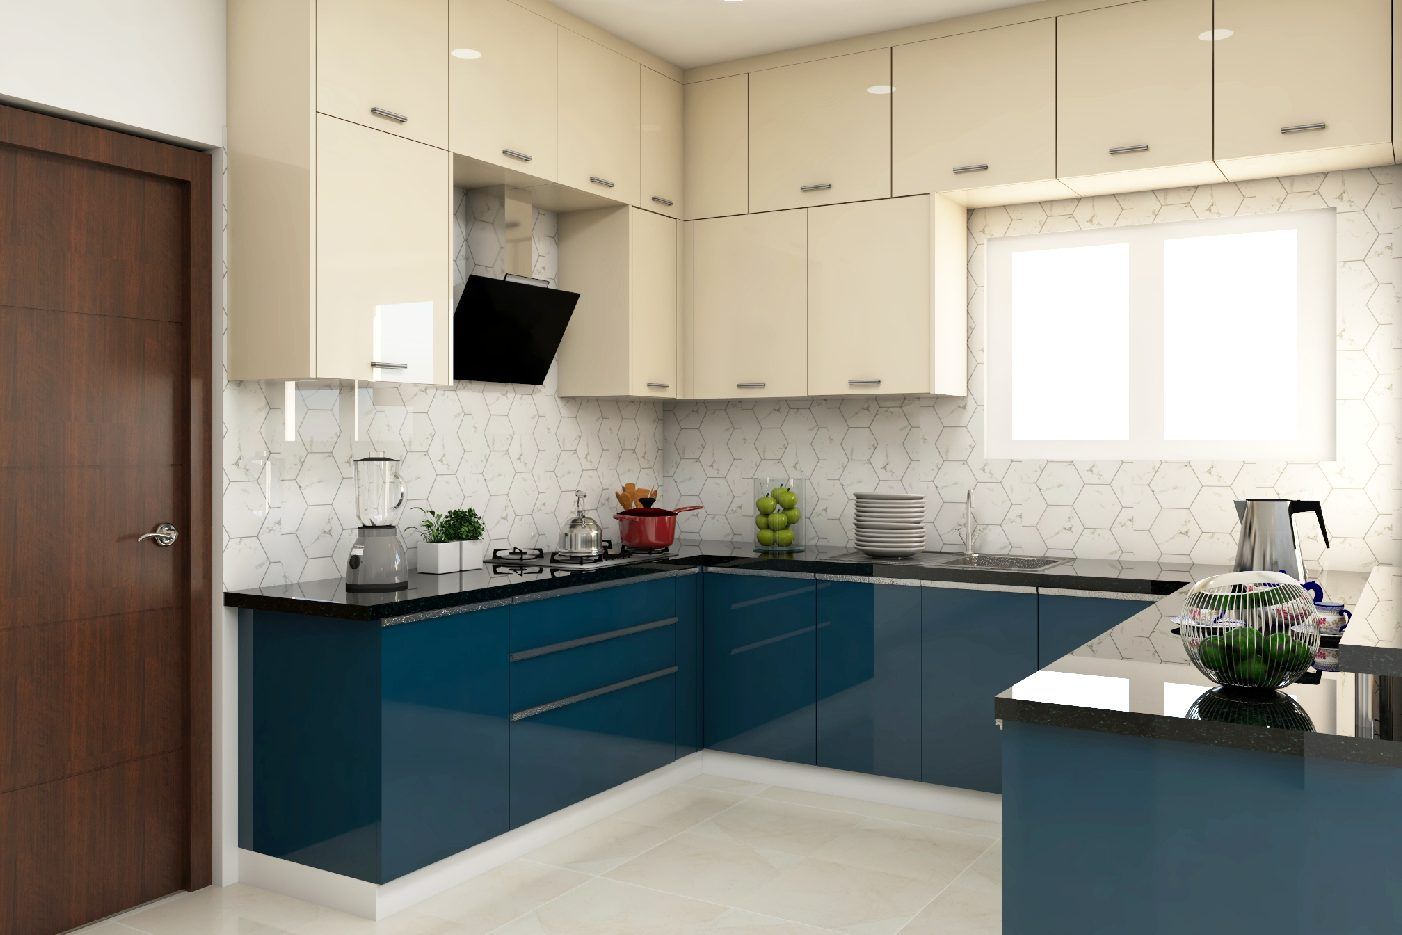 Spacious Low Maintenance Kitchen Design In Beige And Blue